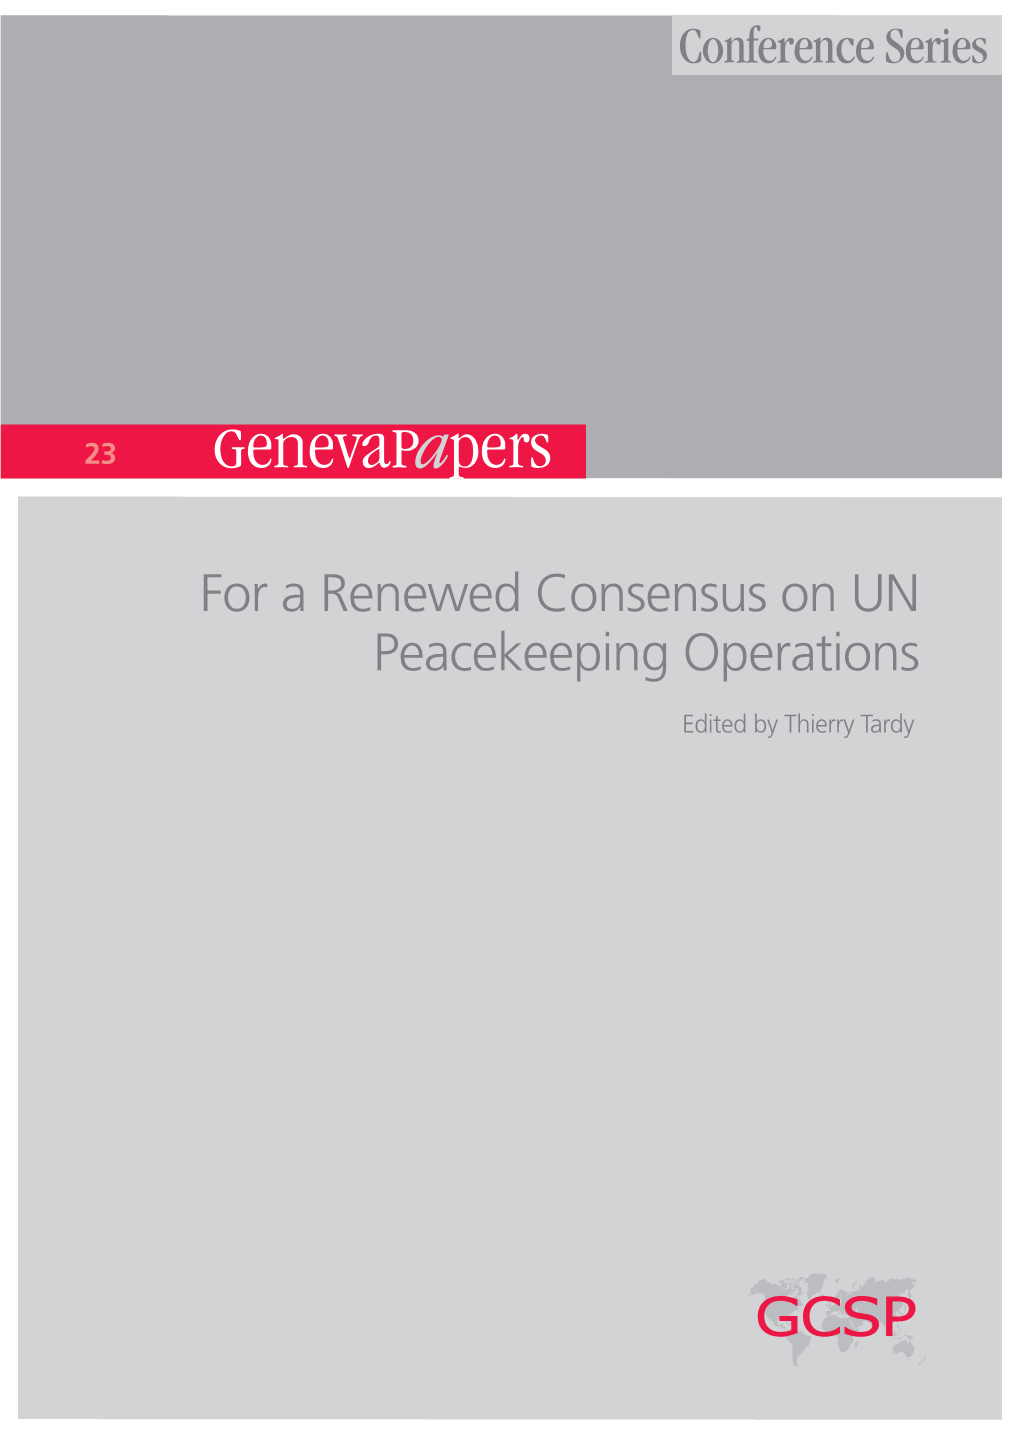 For a Renewed Consensus on UN Peacekeeping Operations